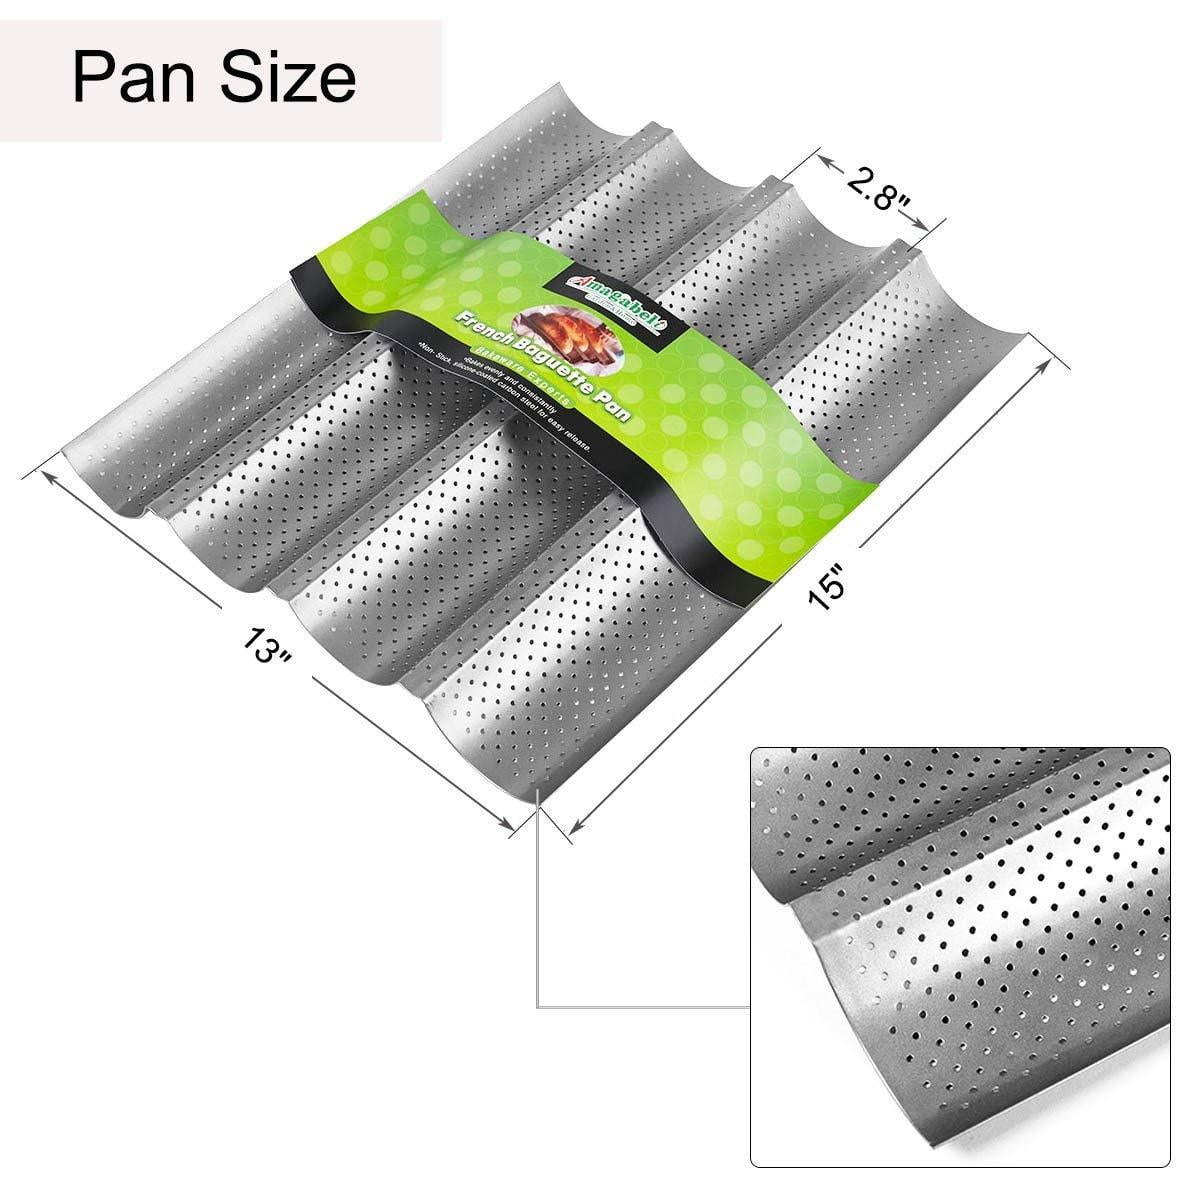 Toast Bread Baking Tray 15 x 13 Gutter Oven Toaster Pan MYO French Bread Baking Pan Nonstick Perforated Baguette Pan 4 Wave Loaves Loaf Mold Italian Bread Pan Cloche Waves Silver Steel Tray